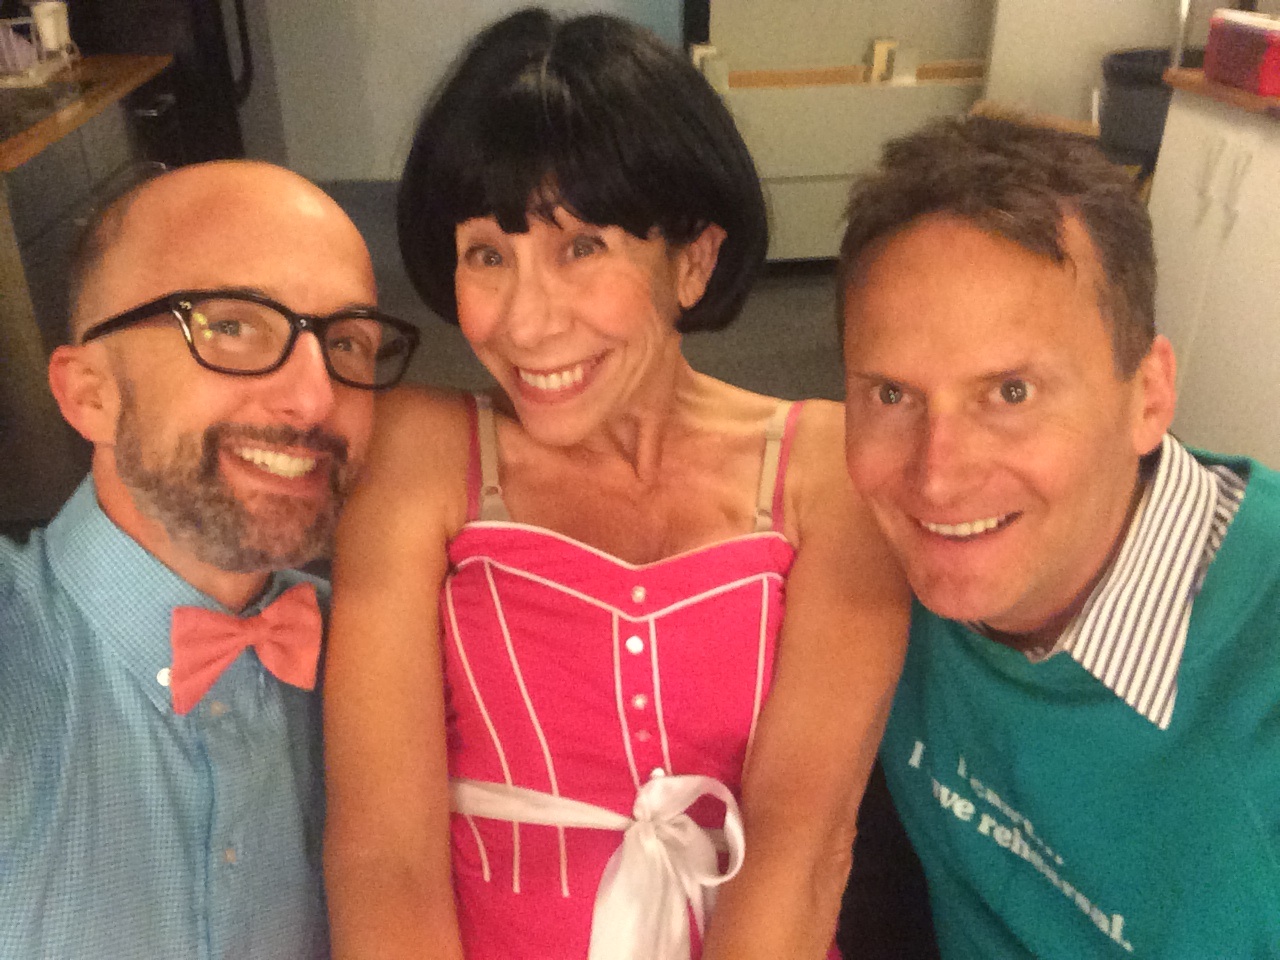 BACKSTAGE AT THE GROUNDLINGS WITH JIM RASH AND MINDY STERLING